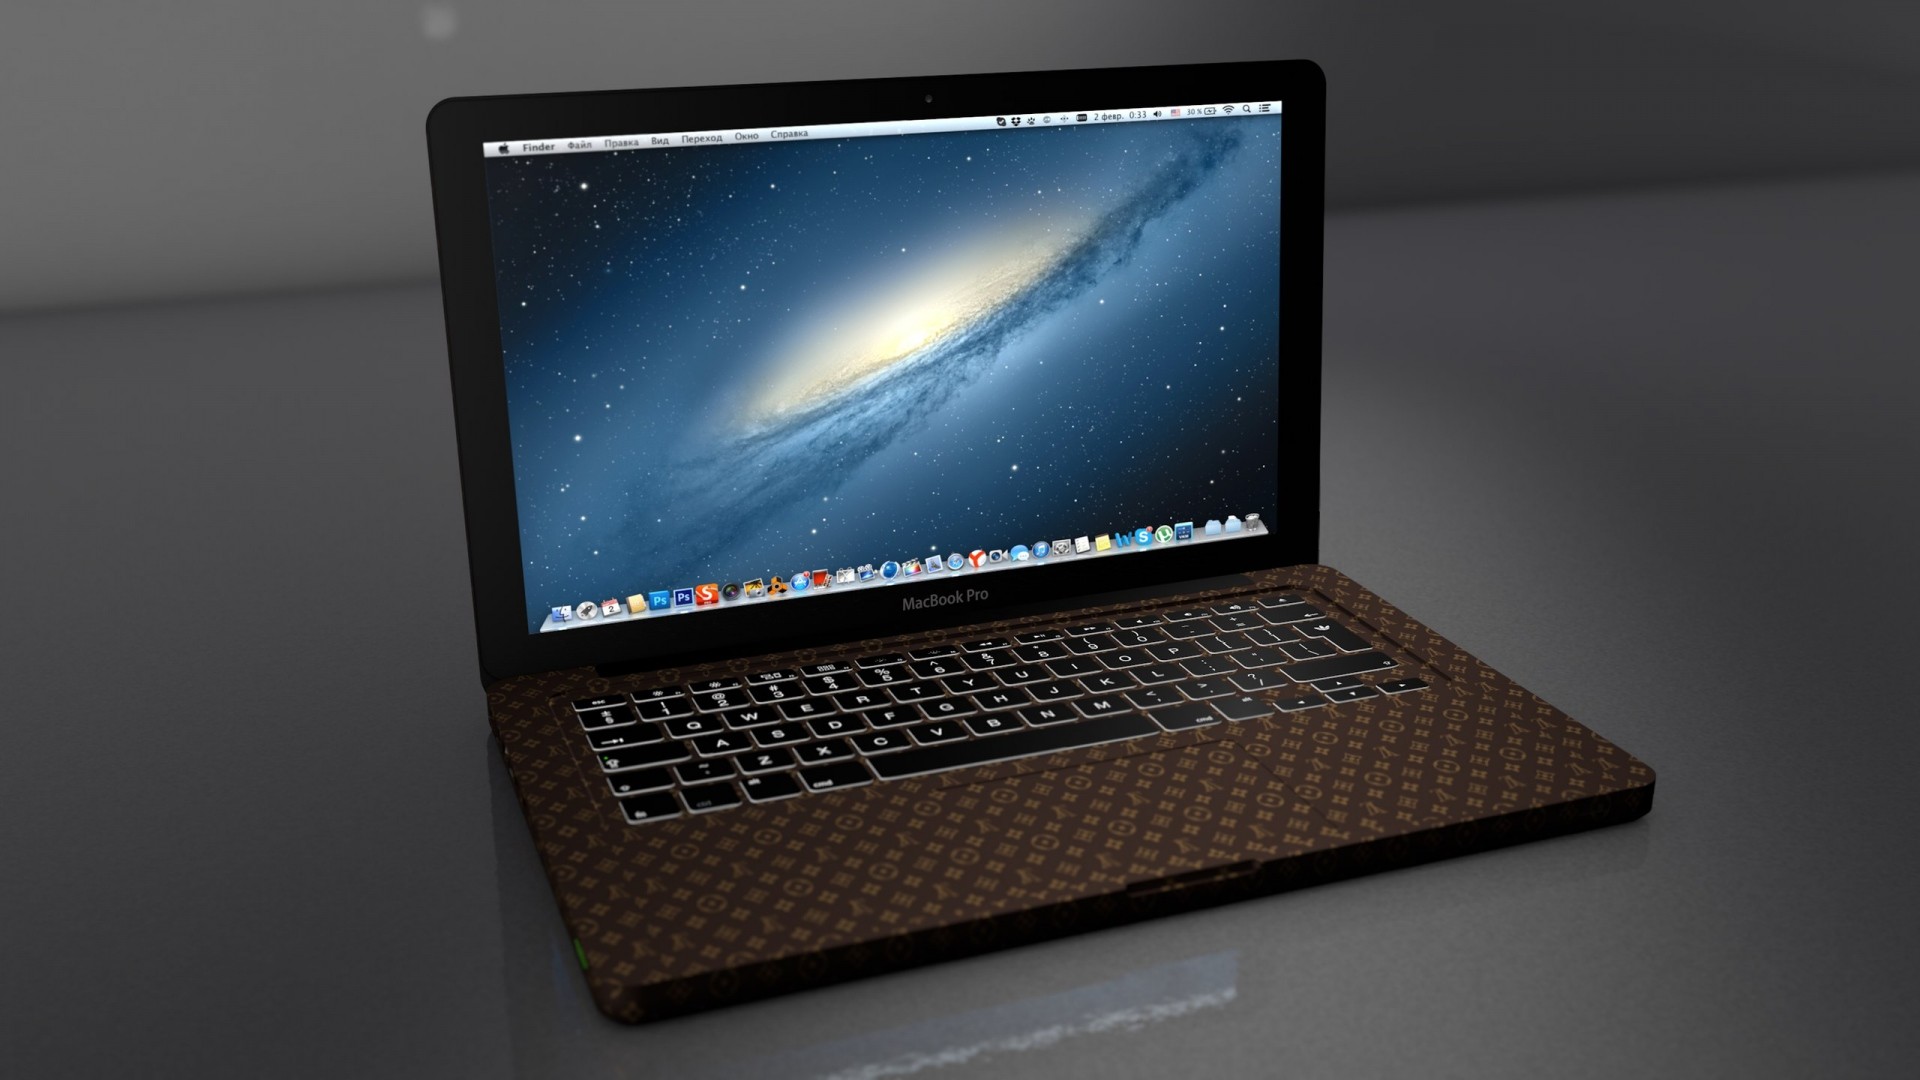 1920x1080 awesome Macbook Laptop HD Wallpapers Check more at http://scottsdigital.com/